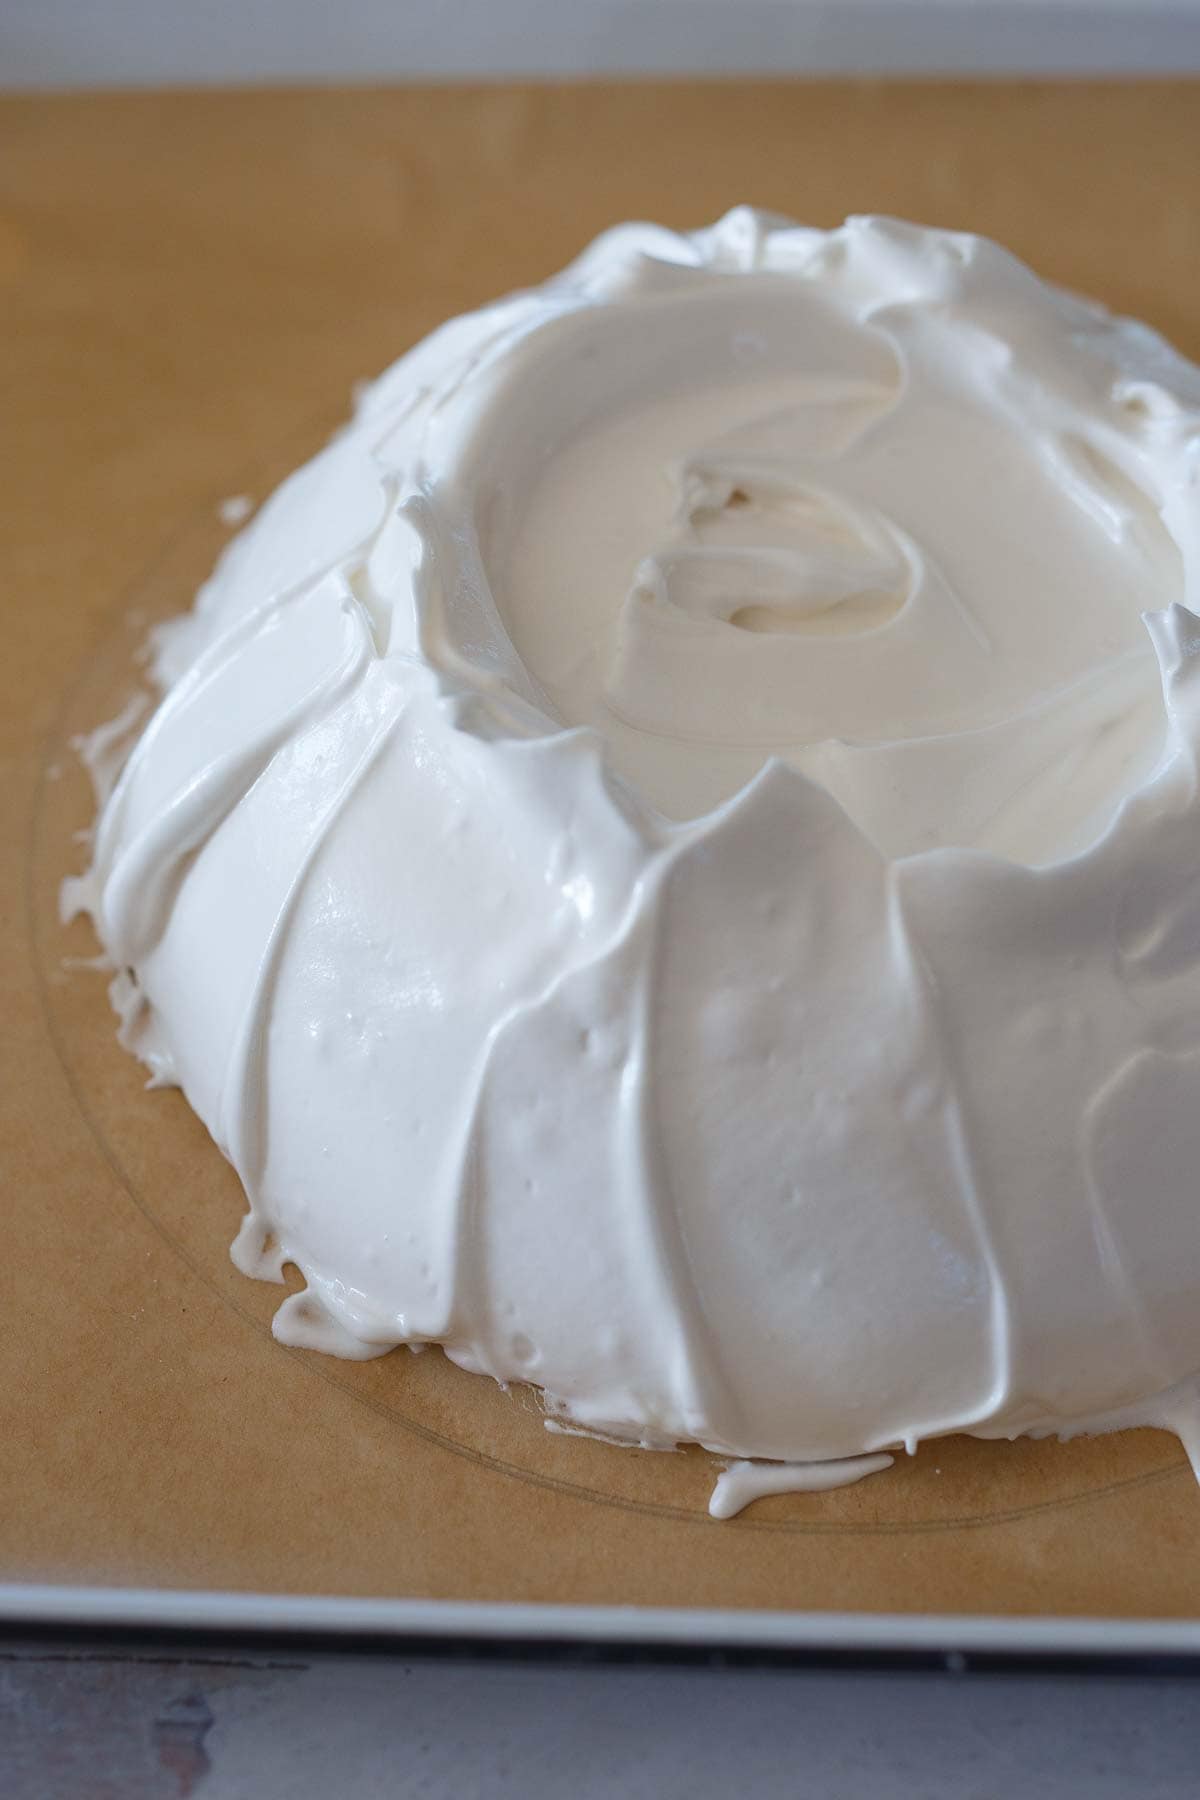 Smoothing up the sides of the pavlova.